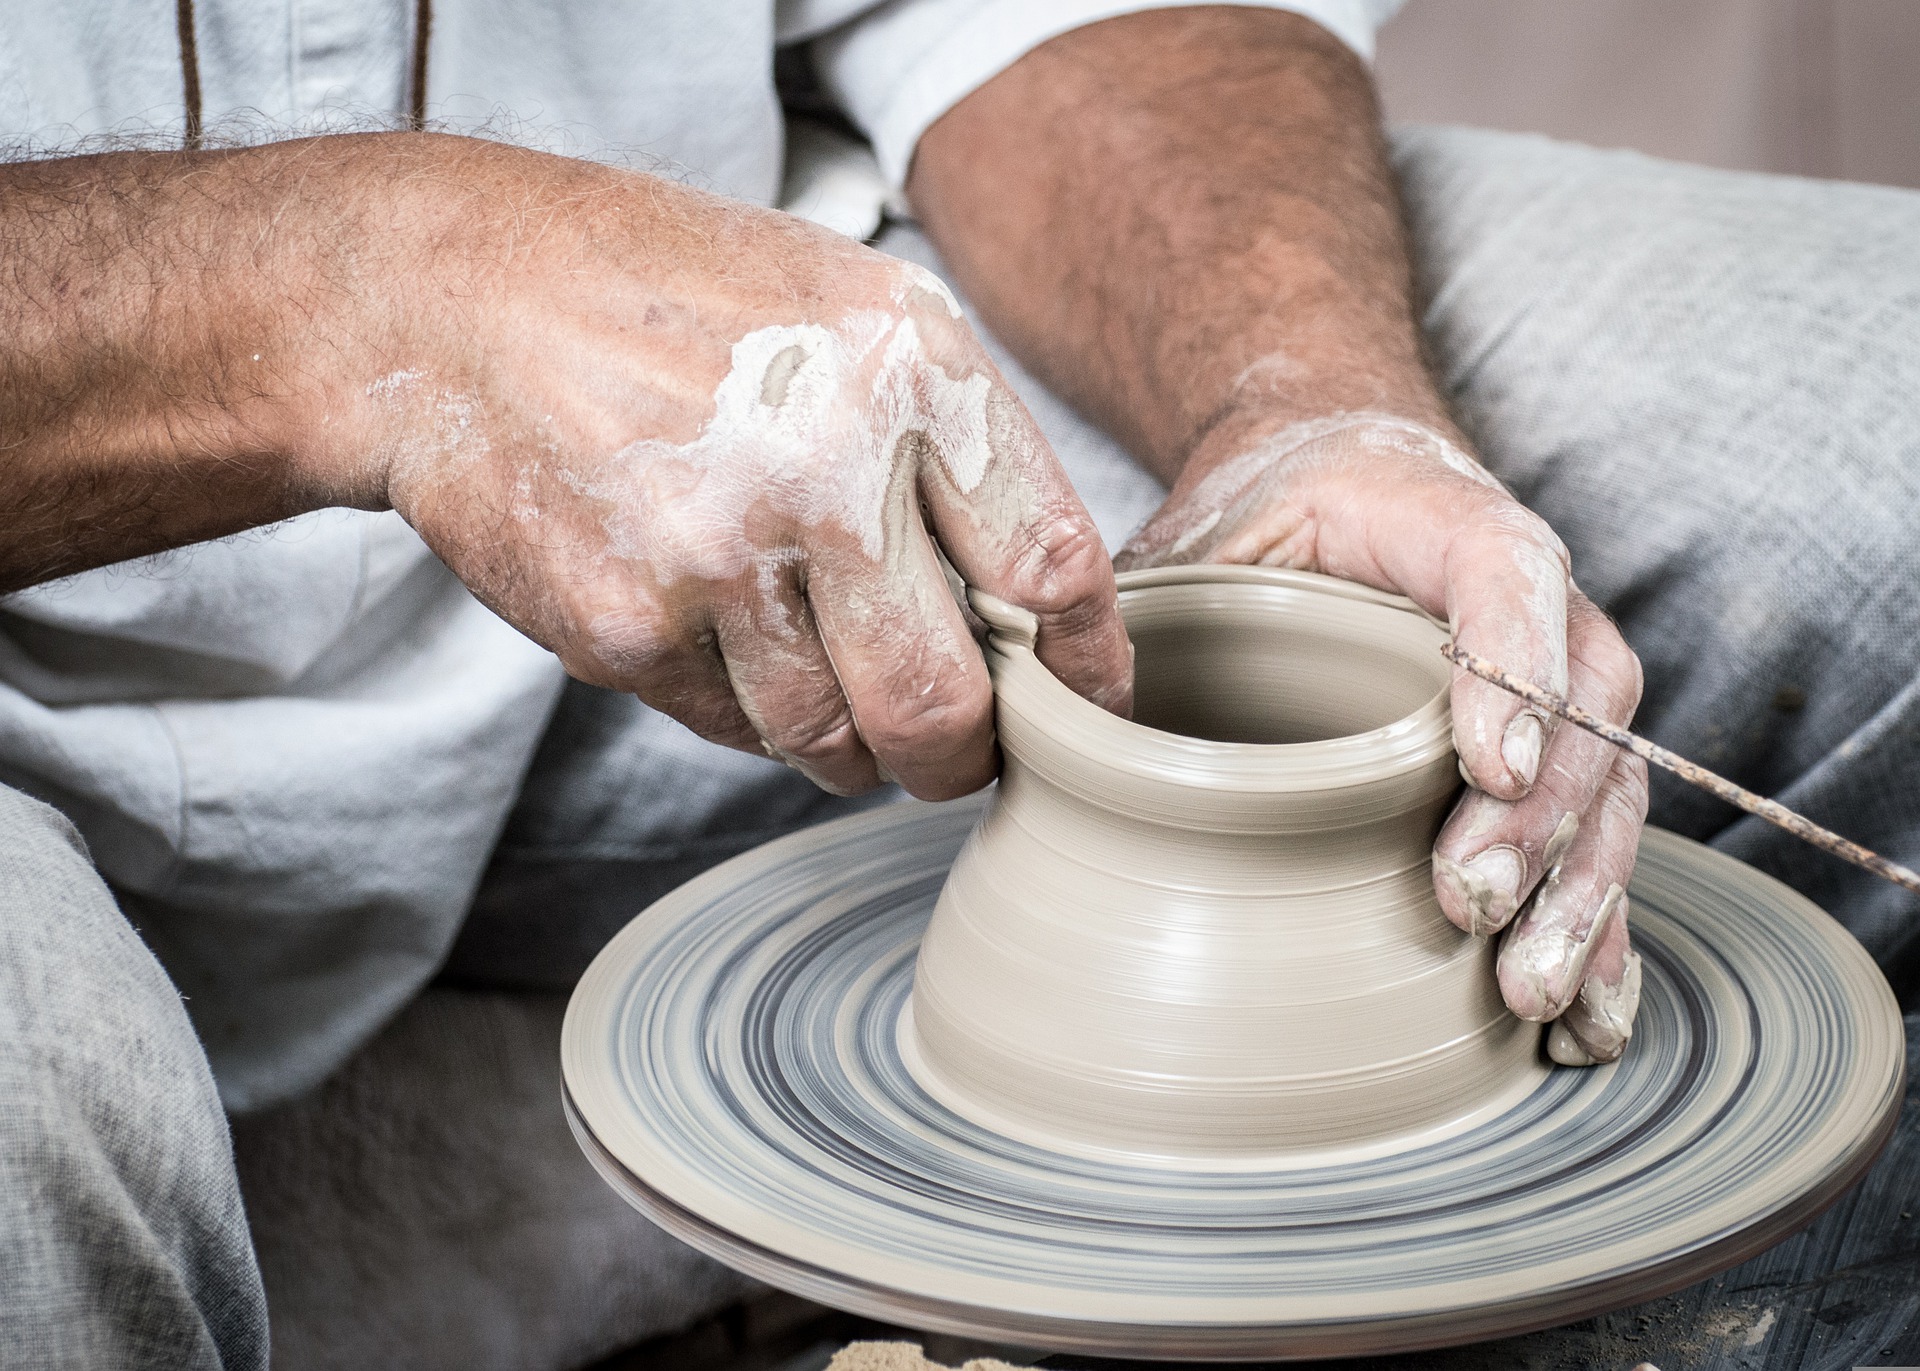 Enjoy pottery and more at these Lake Tahoe events